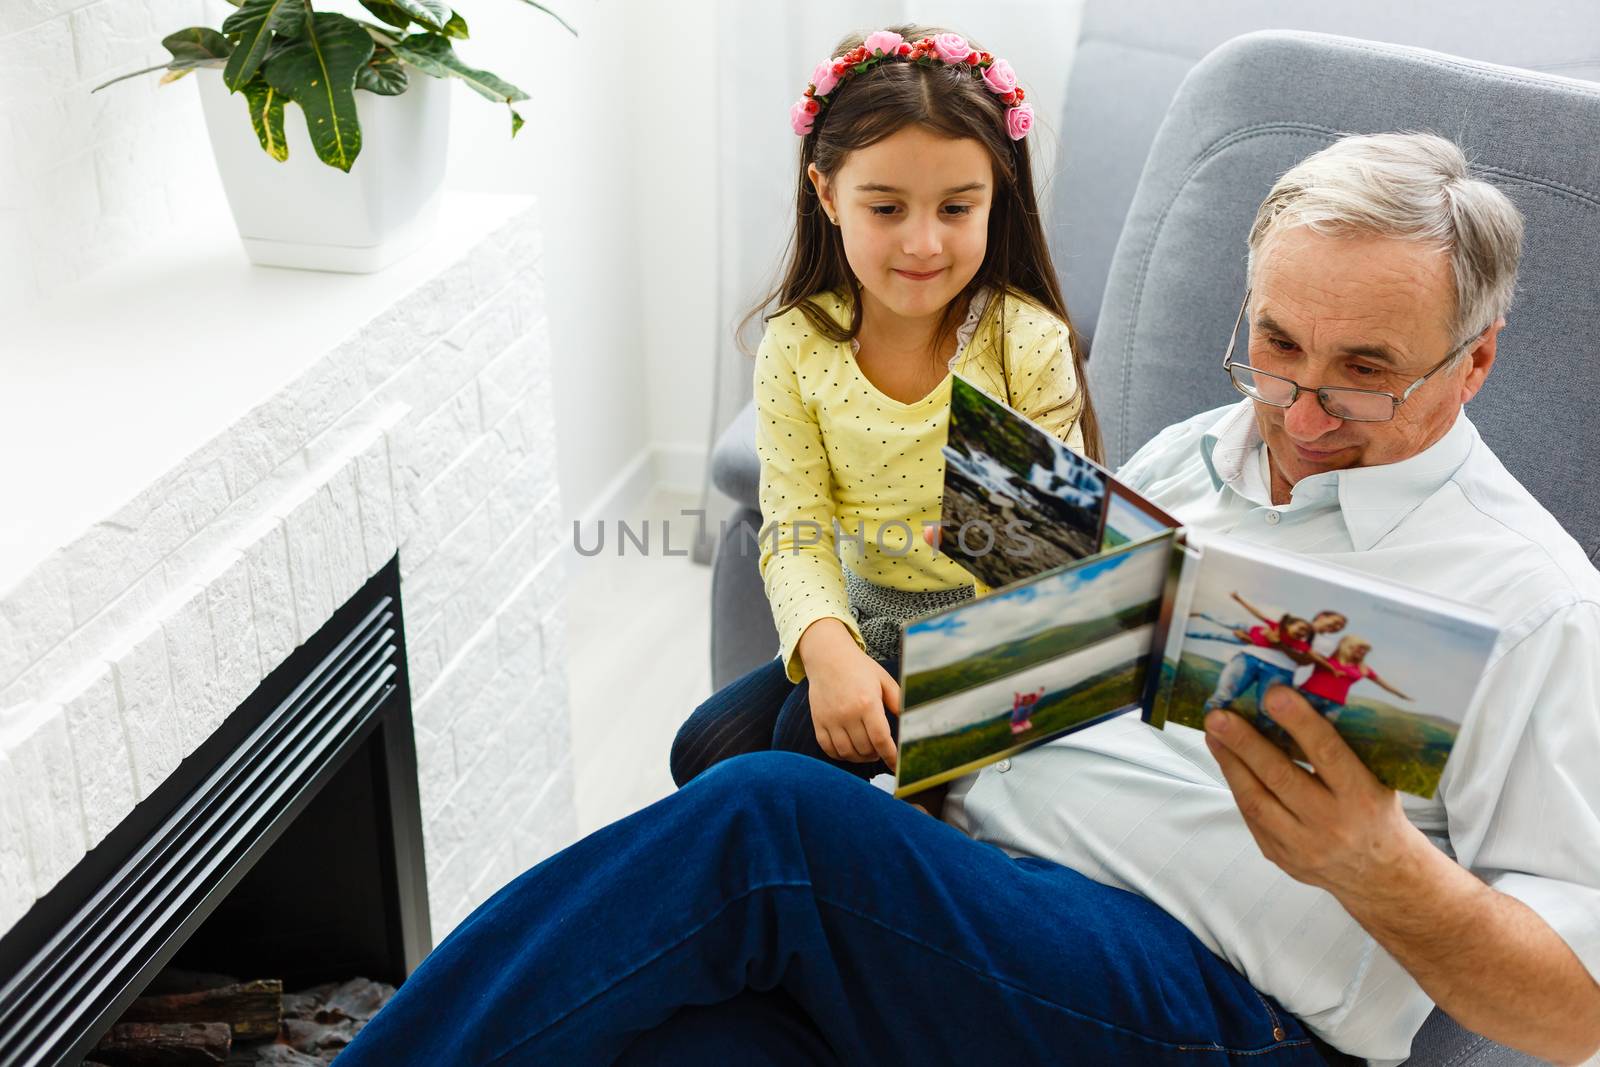 Granddaughter and grandfather watching photos together in a photo album at home by Andelov13